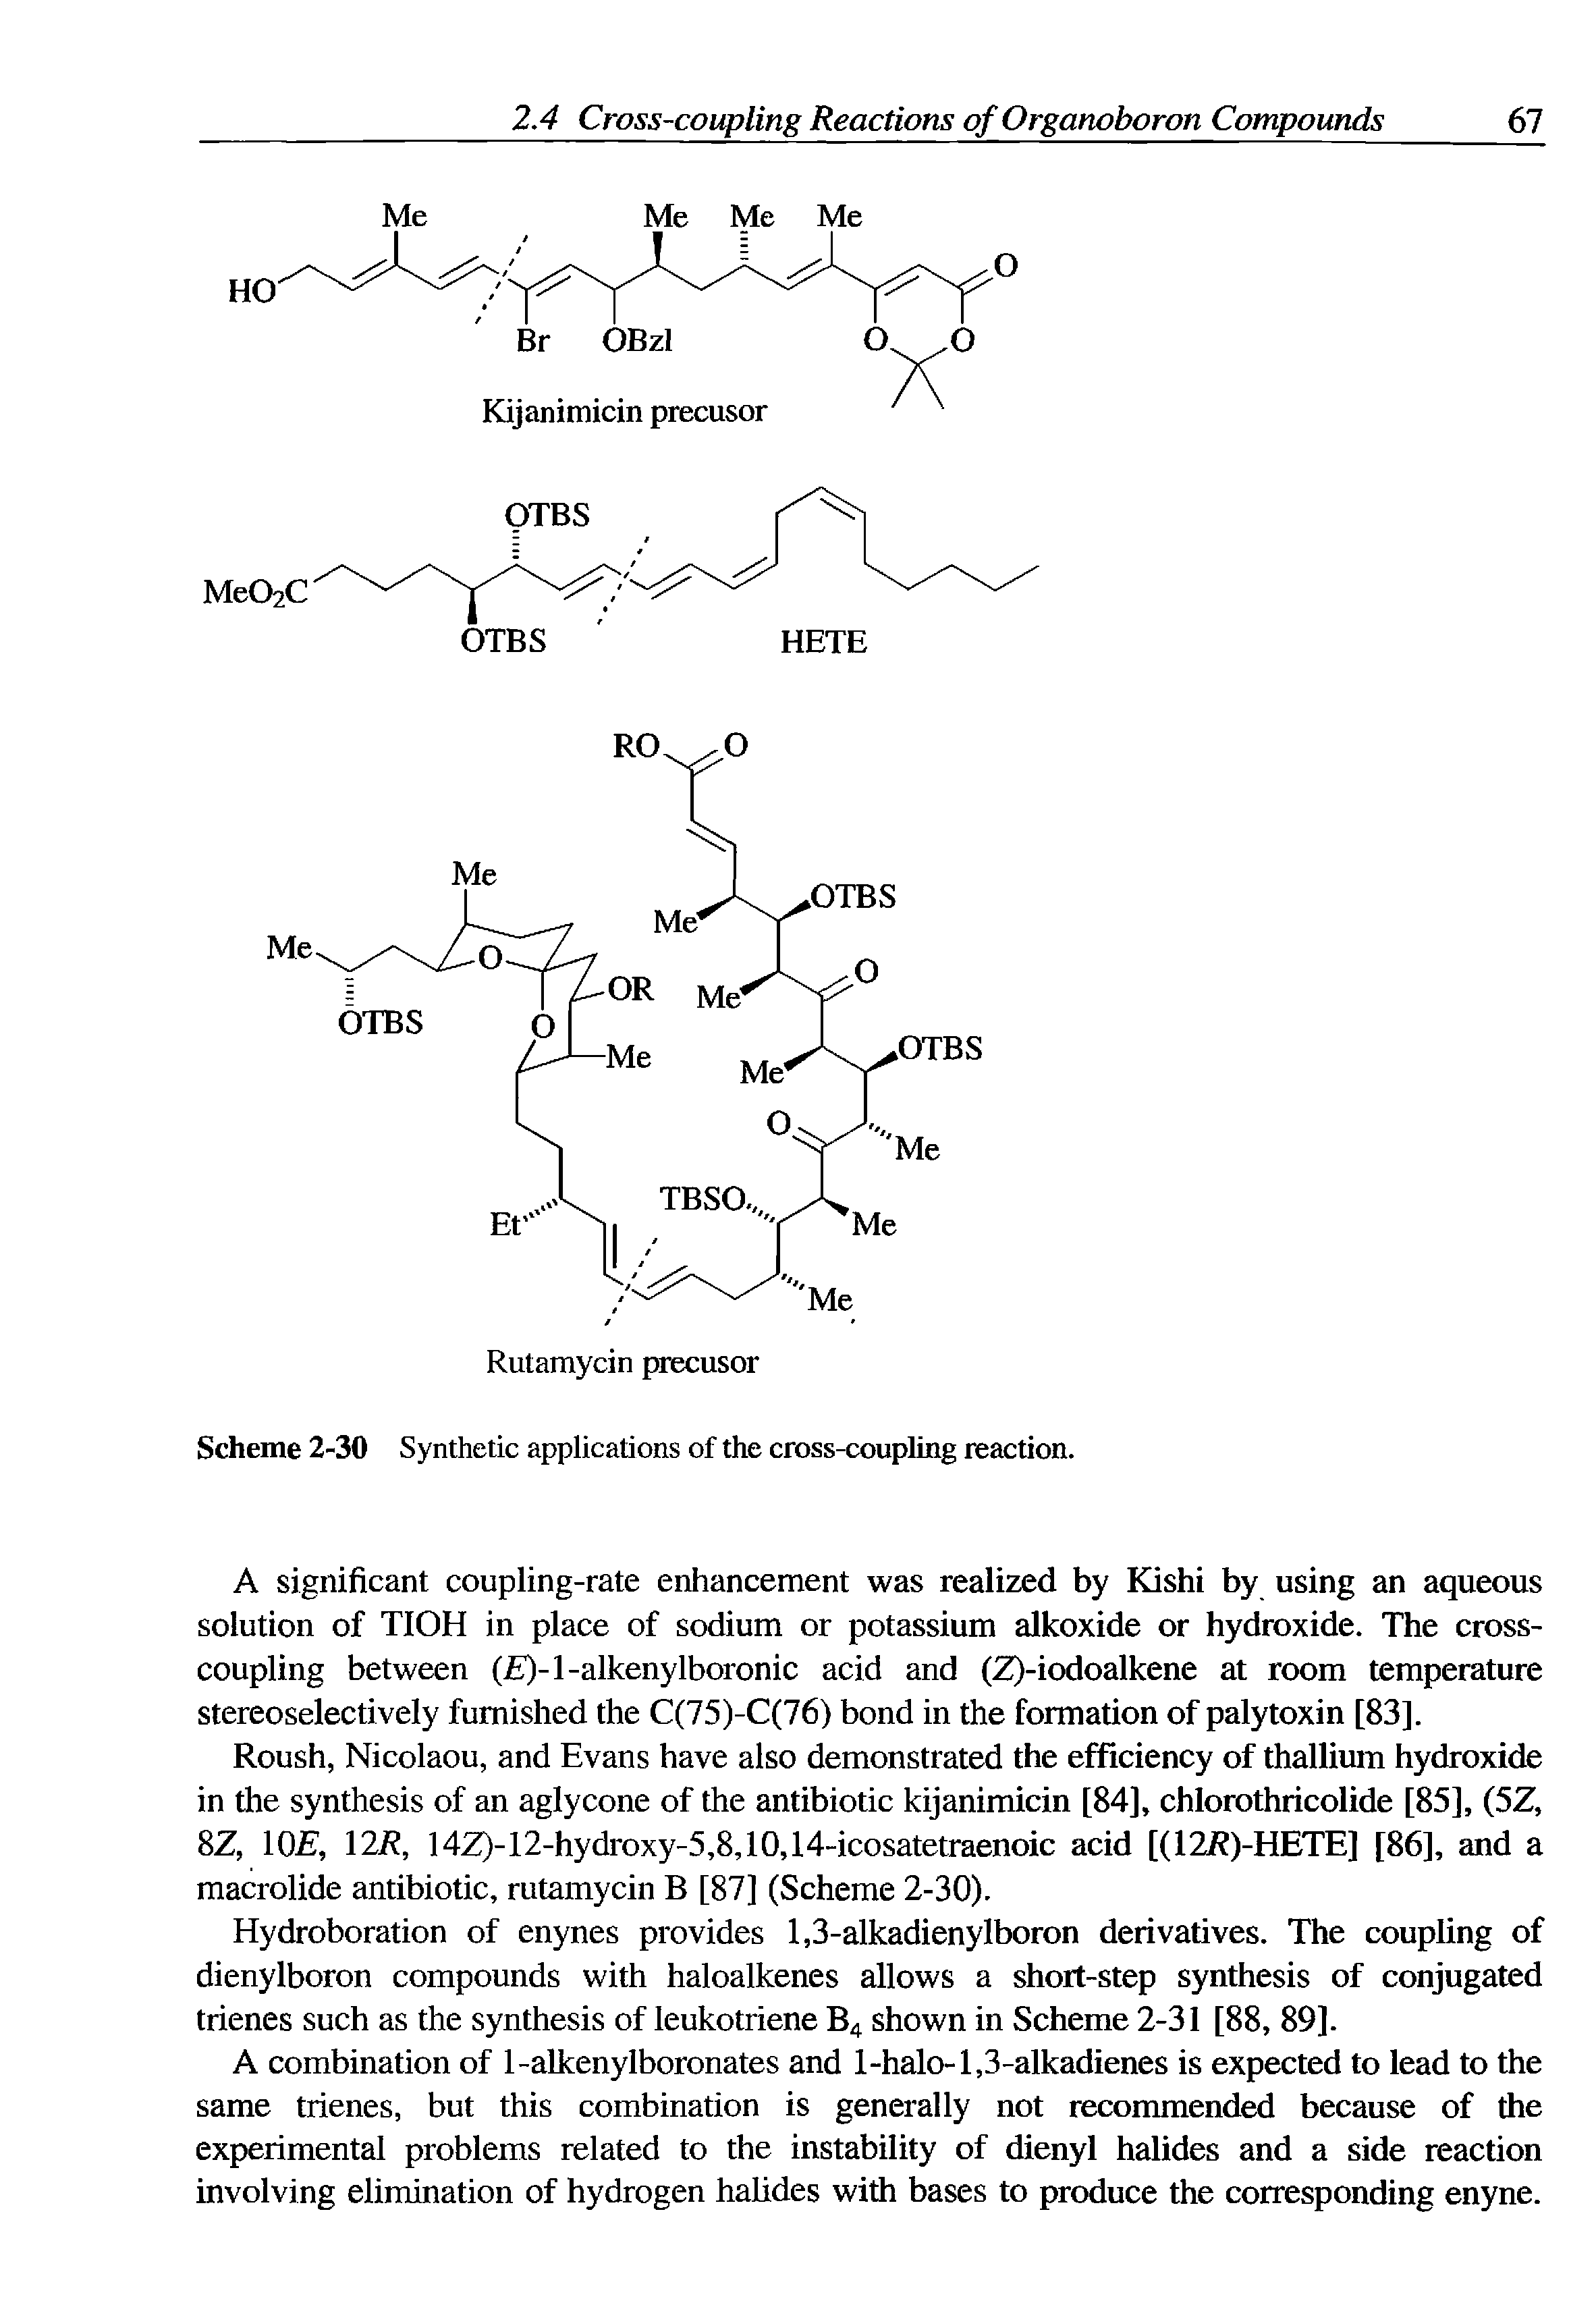 Scheme 2-30 Synthetic applications of the cross-coupling reaction.